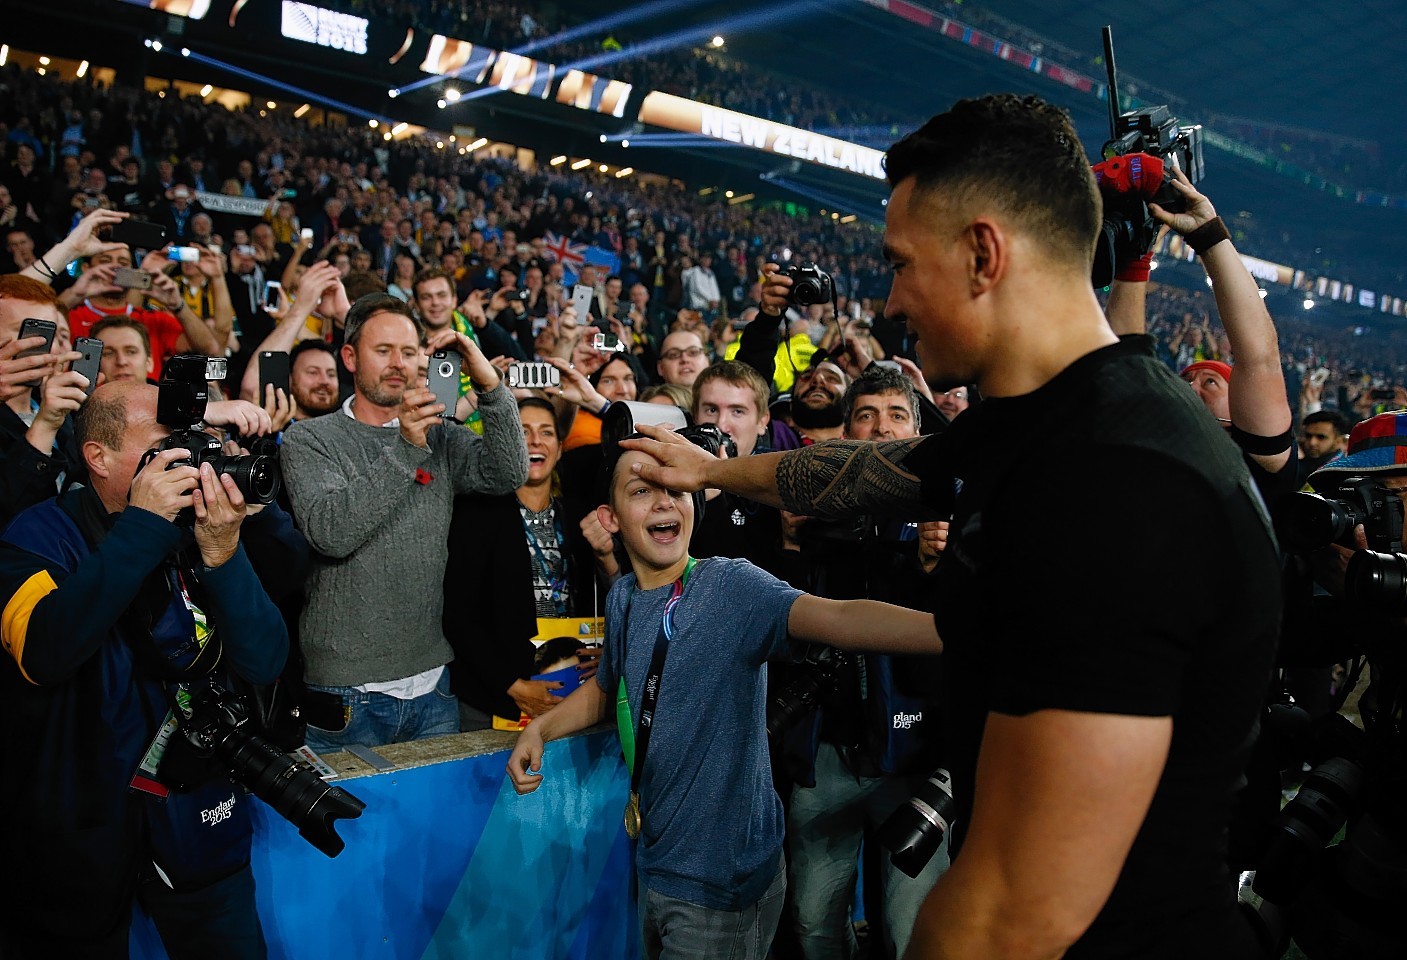 LONDON, ENGLAND - OCTOBER 31:  Sonny Bill Williams of New Zealand gives his winners medal to a young fan following the 2015 Rugby World Cup Final match between New Zealand and Australia at Twickenham Stadium on October 31, 2015 in London, United Kingdom.  (Photo by Mike Hewitt/Getty Images)